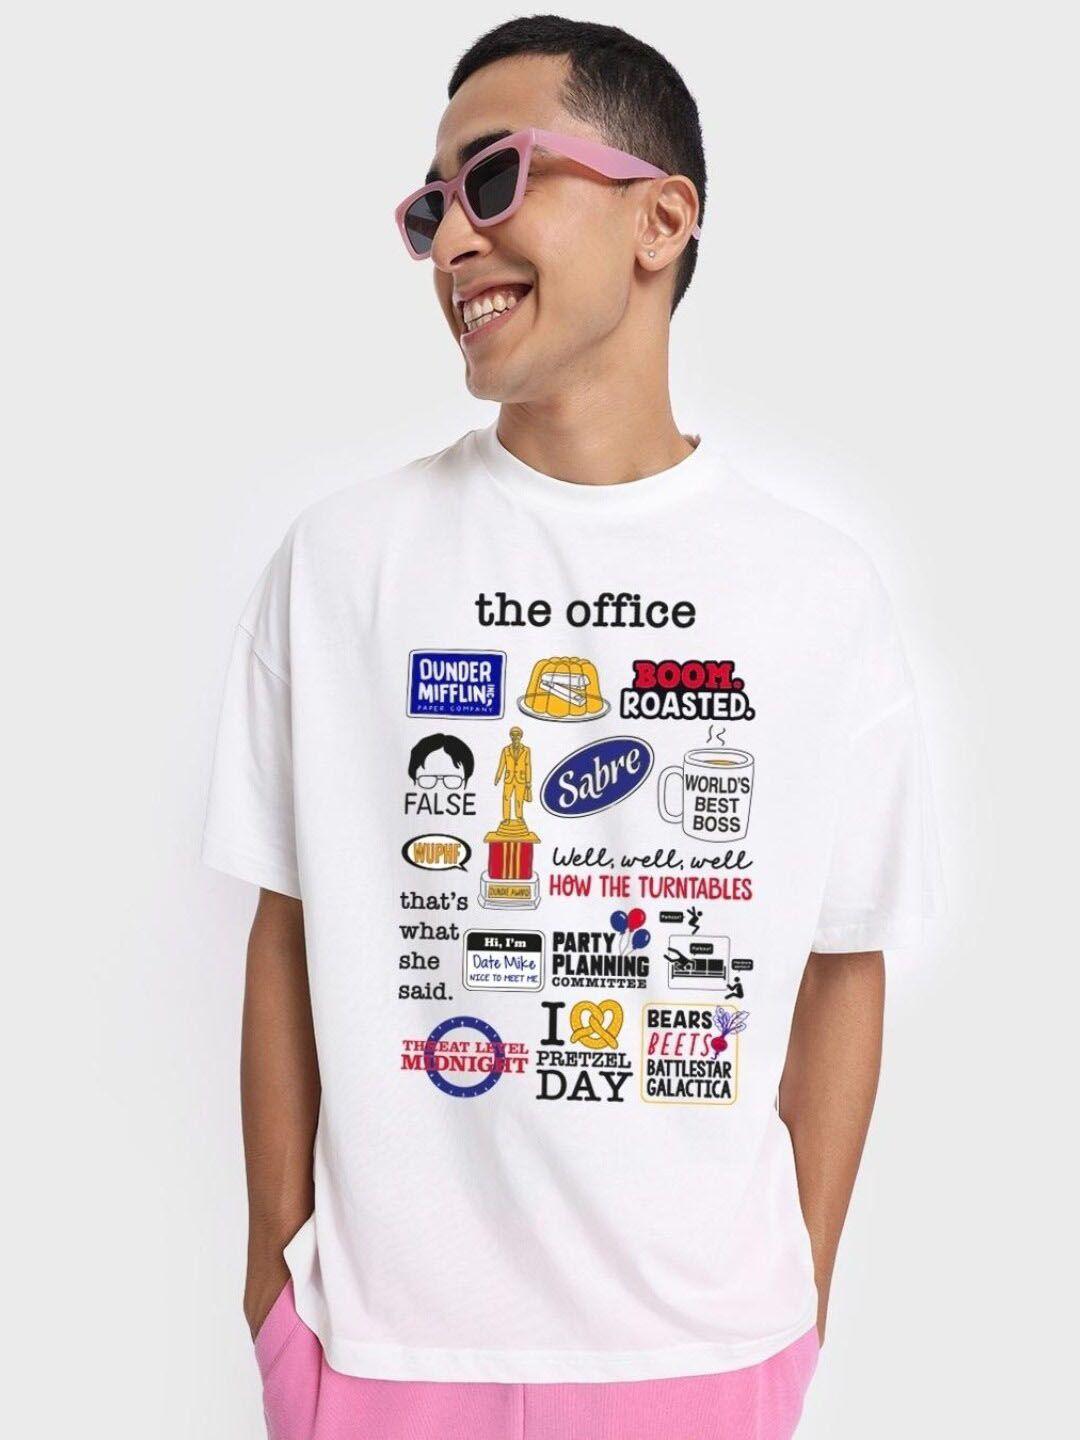 bewakoof x official the office merchandise the office doodle printed oversized t-shirt